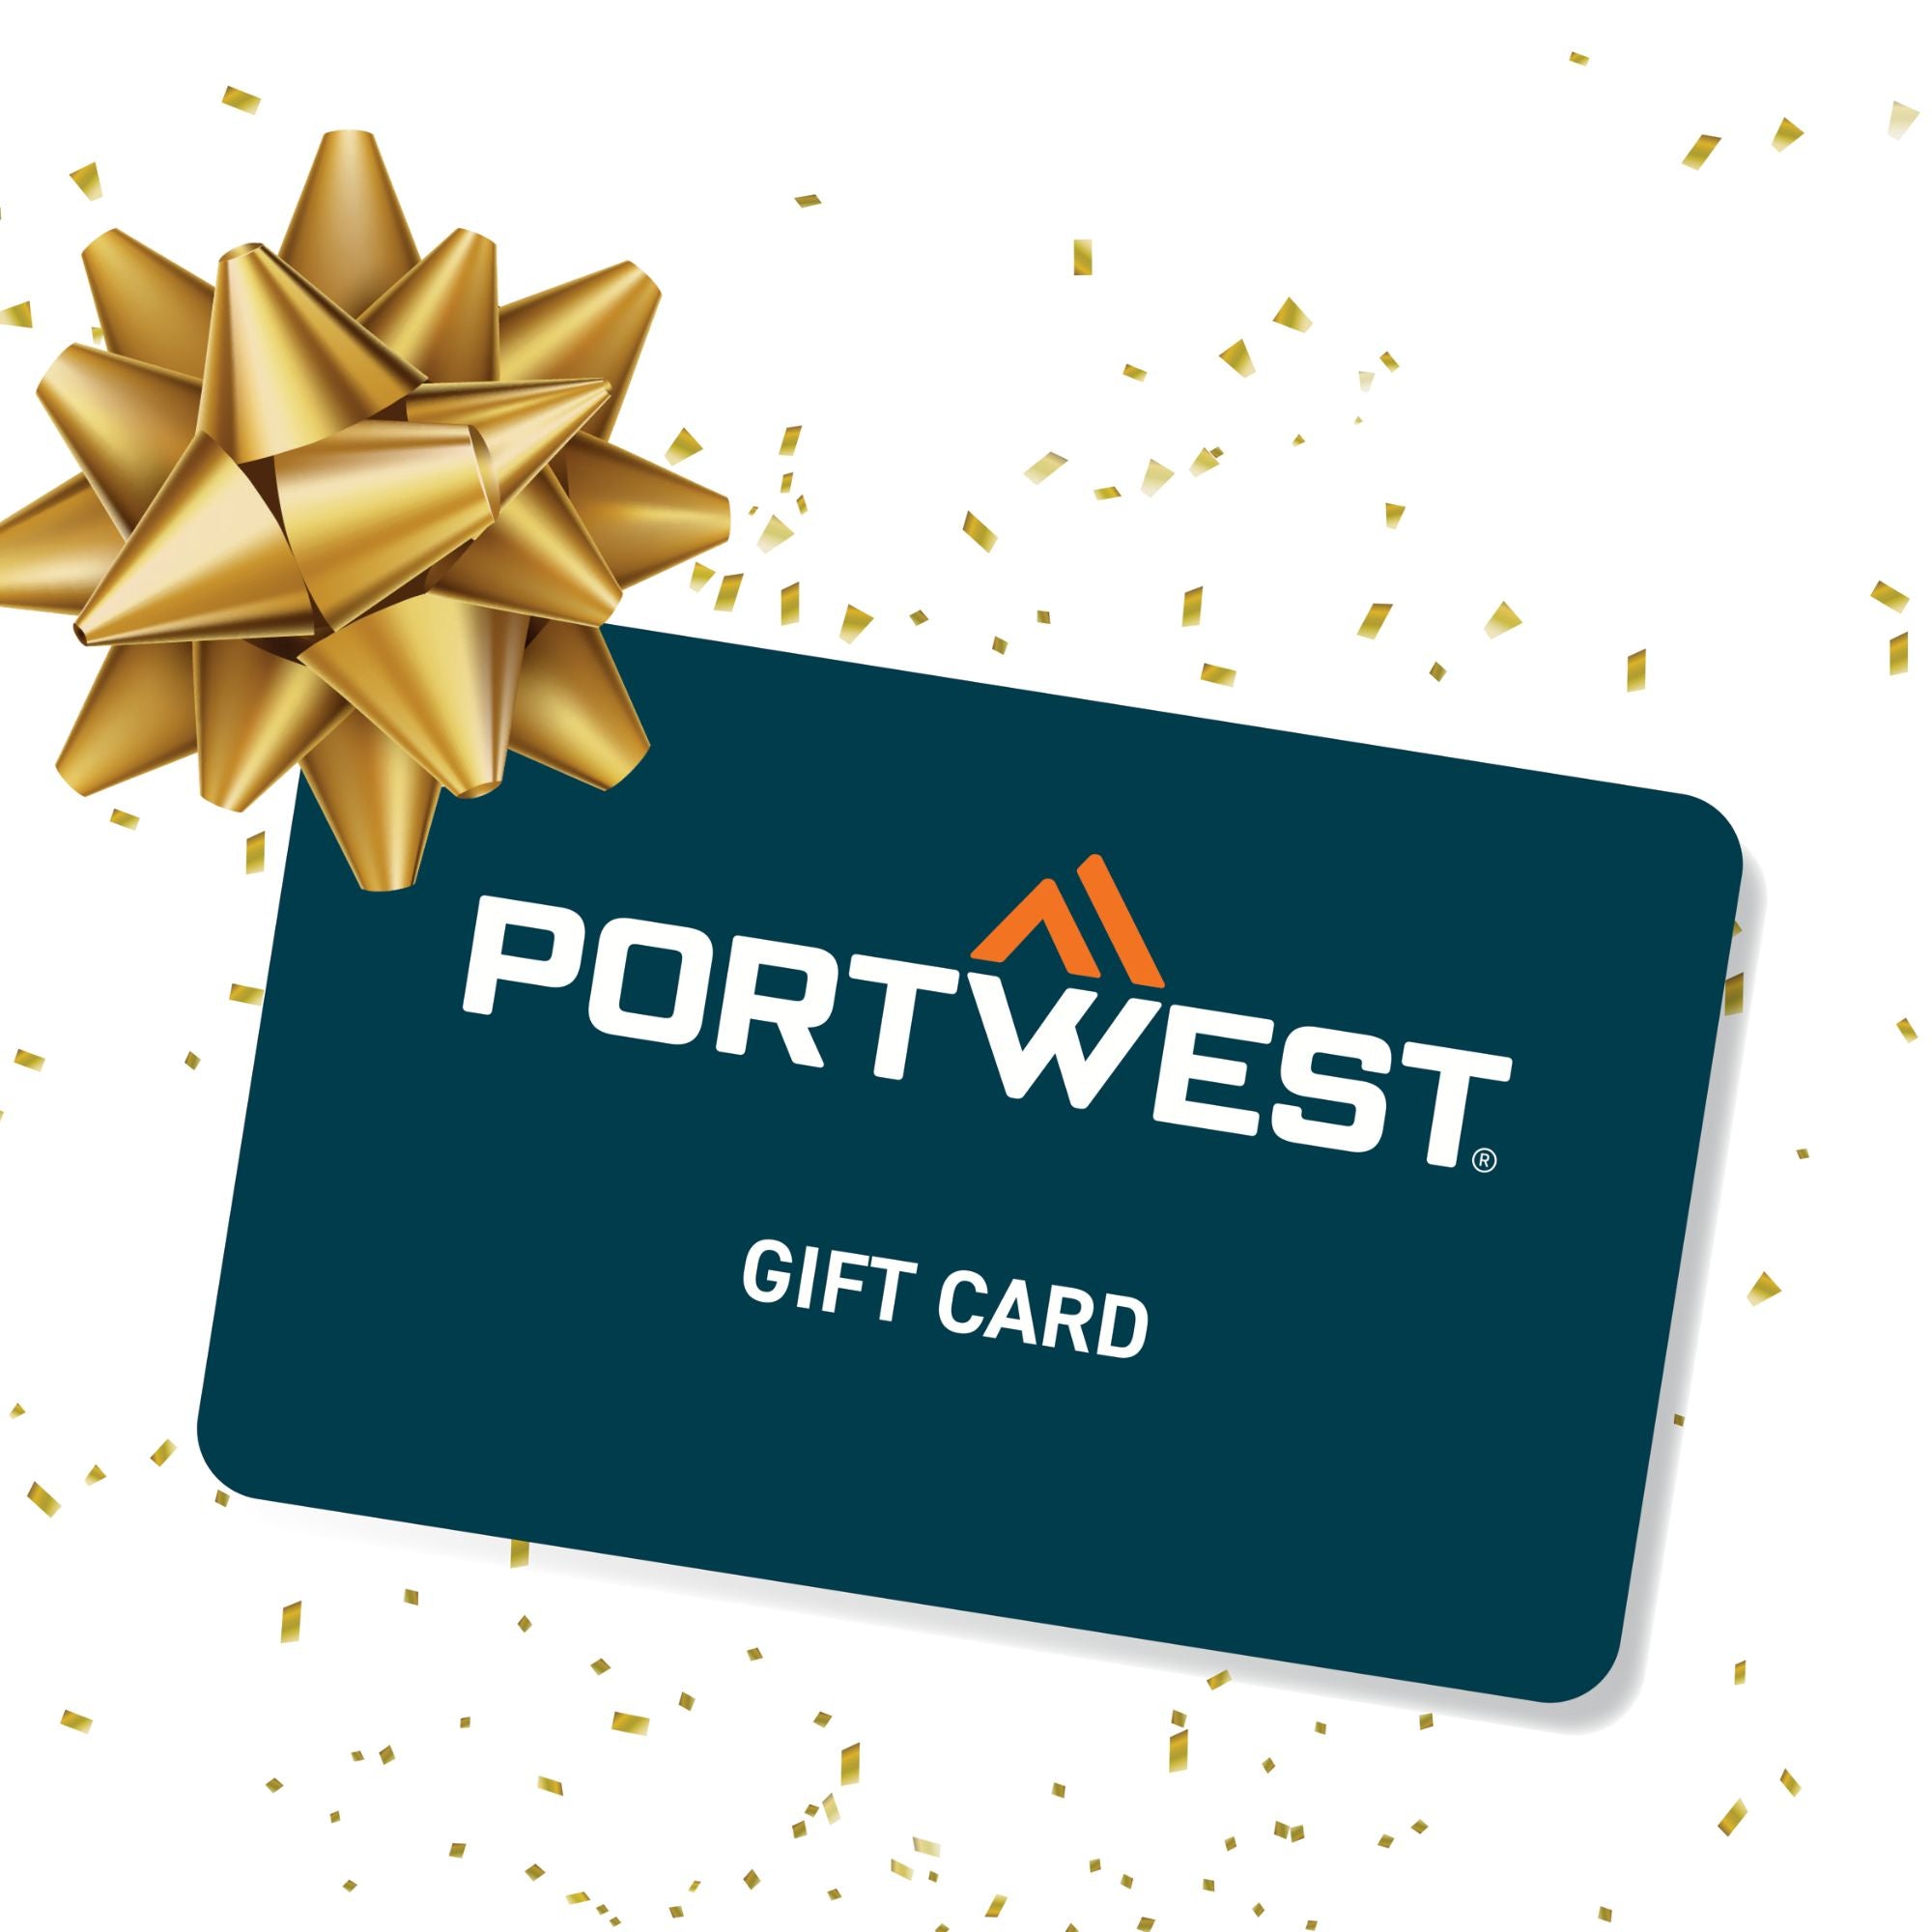 Portwest Ireland Gift Card - For Online Use | Portwest | Portwest - The Outdoor Shop